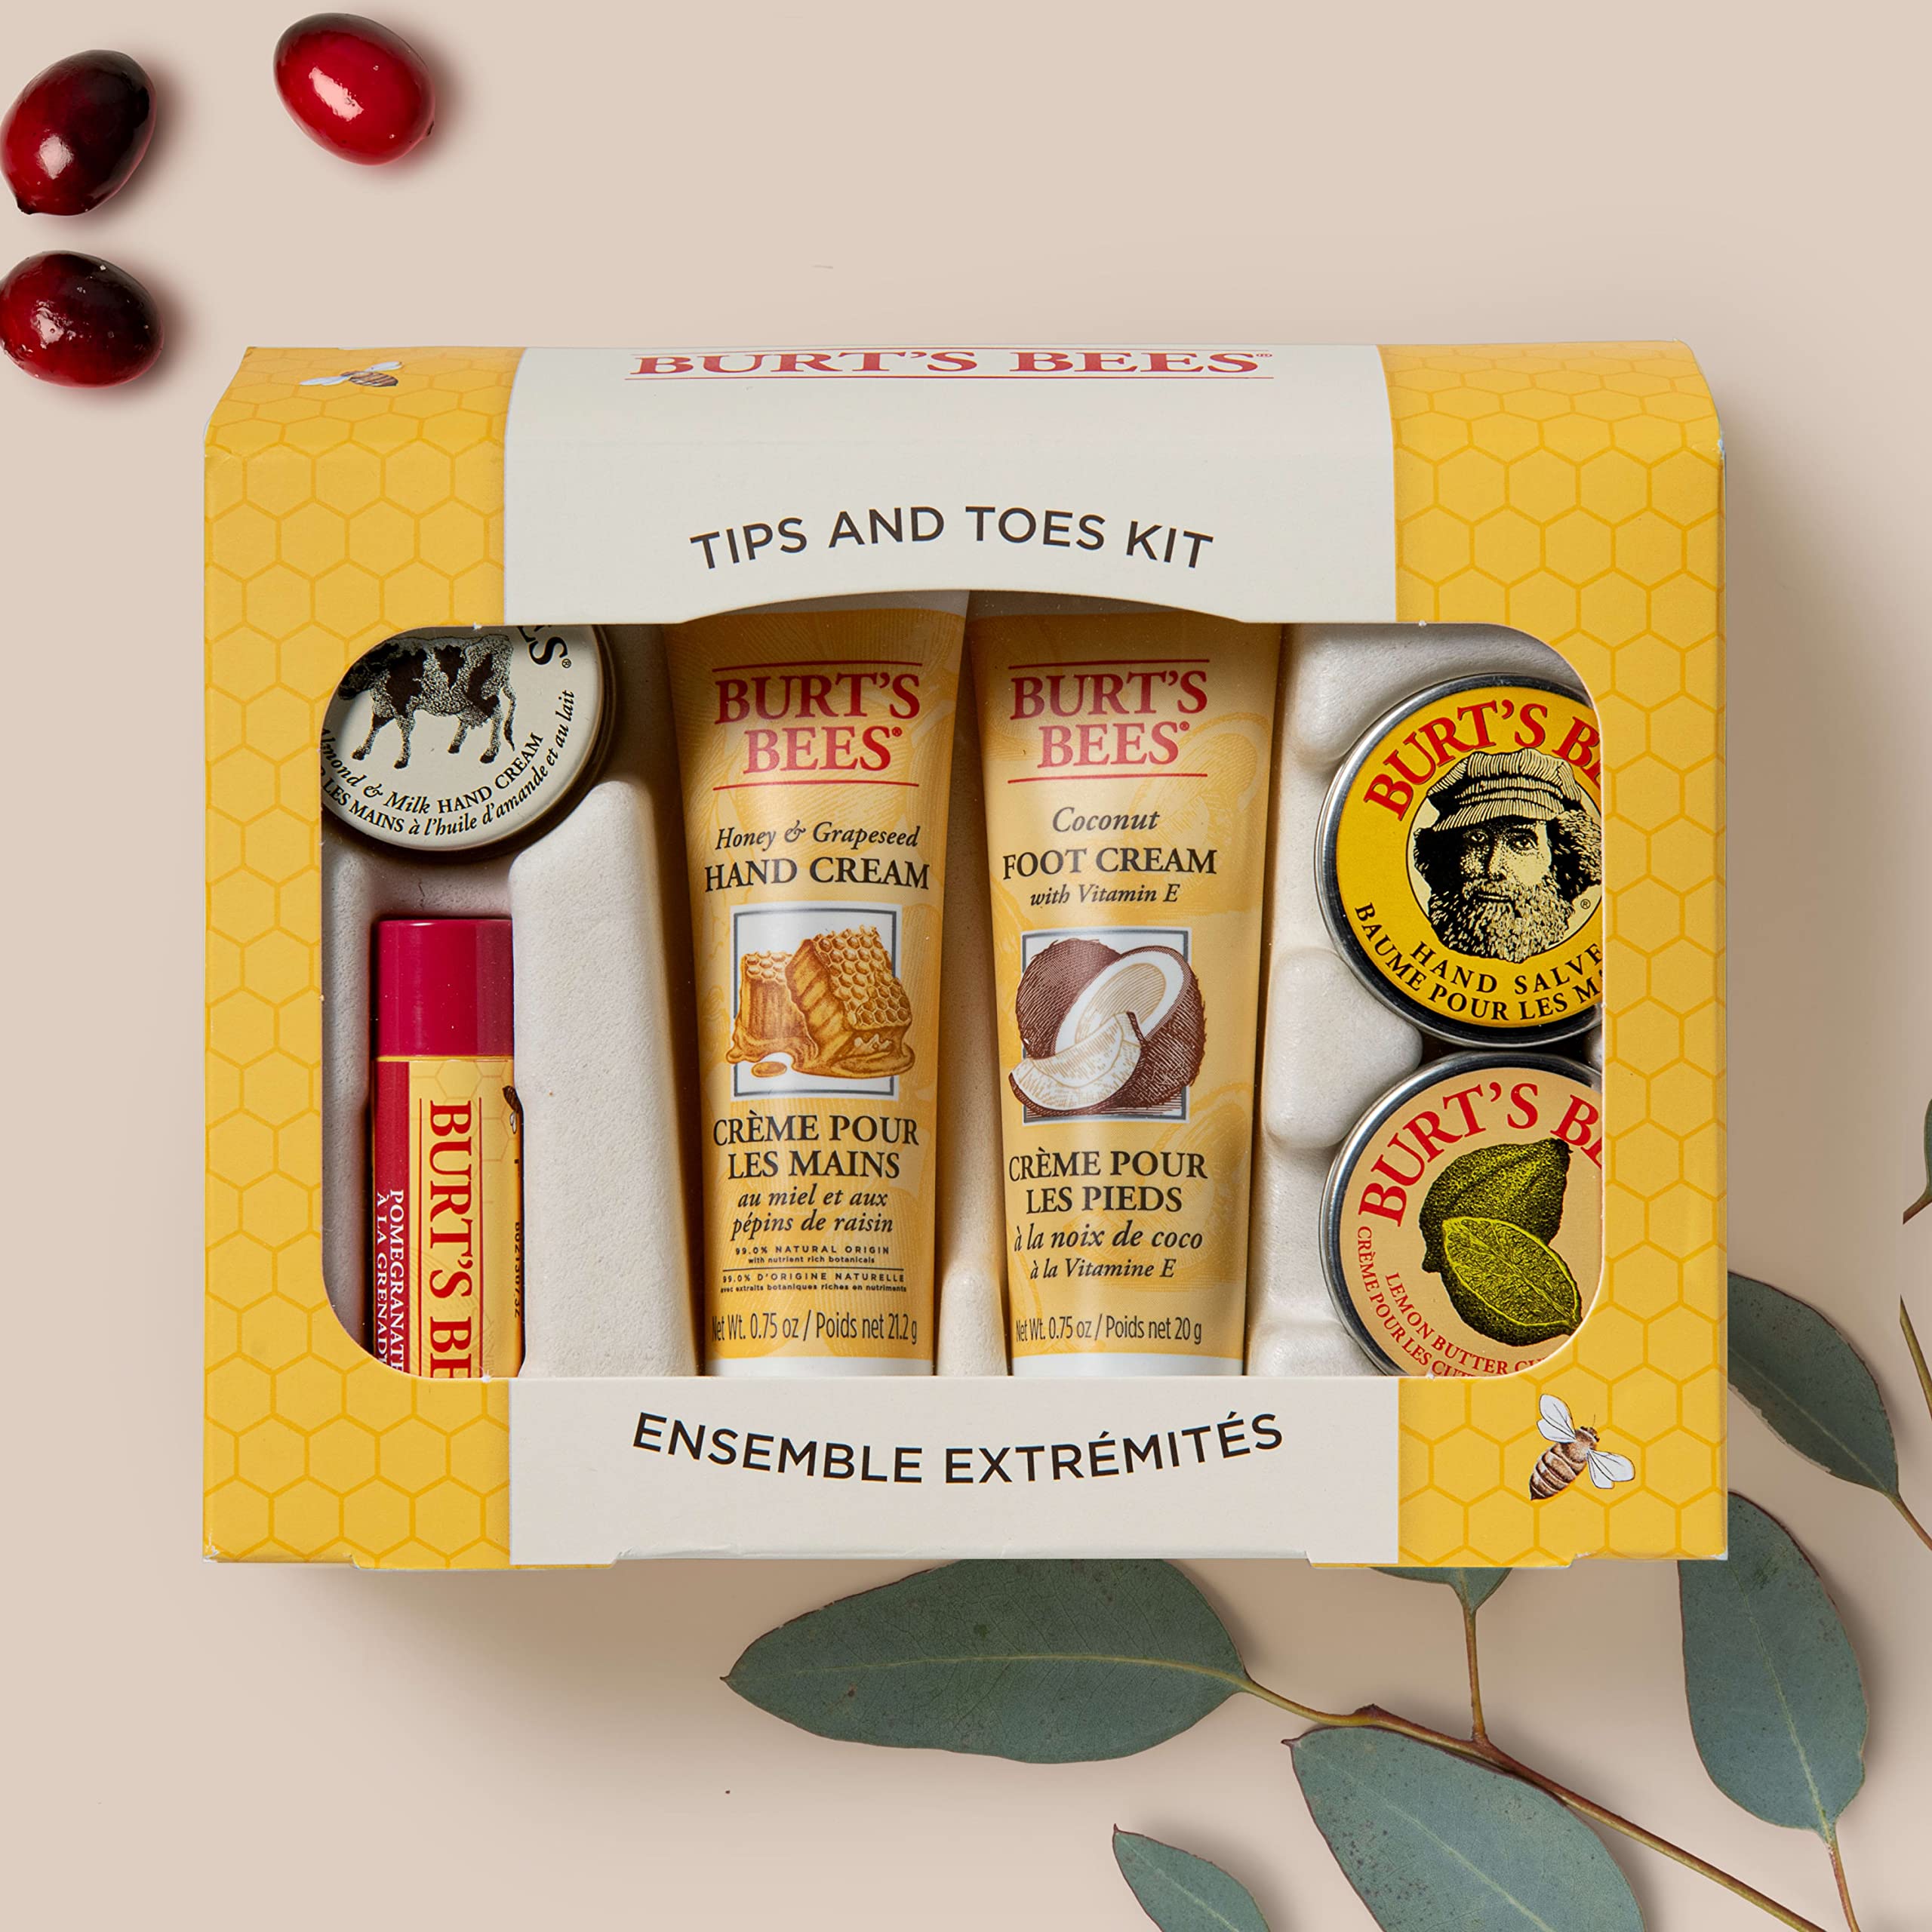 Burt's Bees Back to School Gifts, 6 Dorm Body Care Products for College Students, Tips and Toes Set - Pomegranate Moisturizing Lip Balm, 2 Hand Creams, Foot Cream, Cuticle Cream & Hand Salve